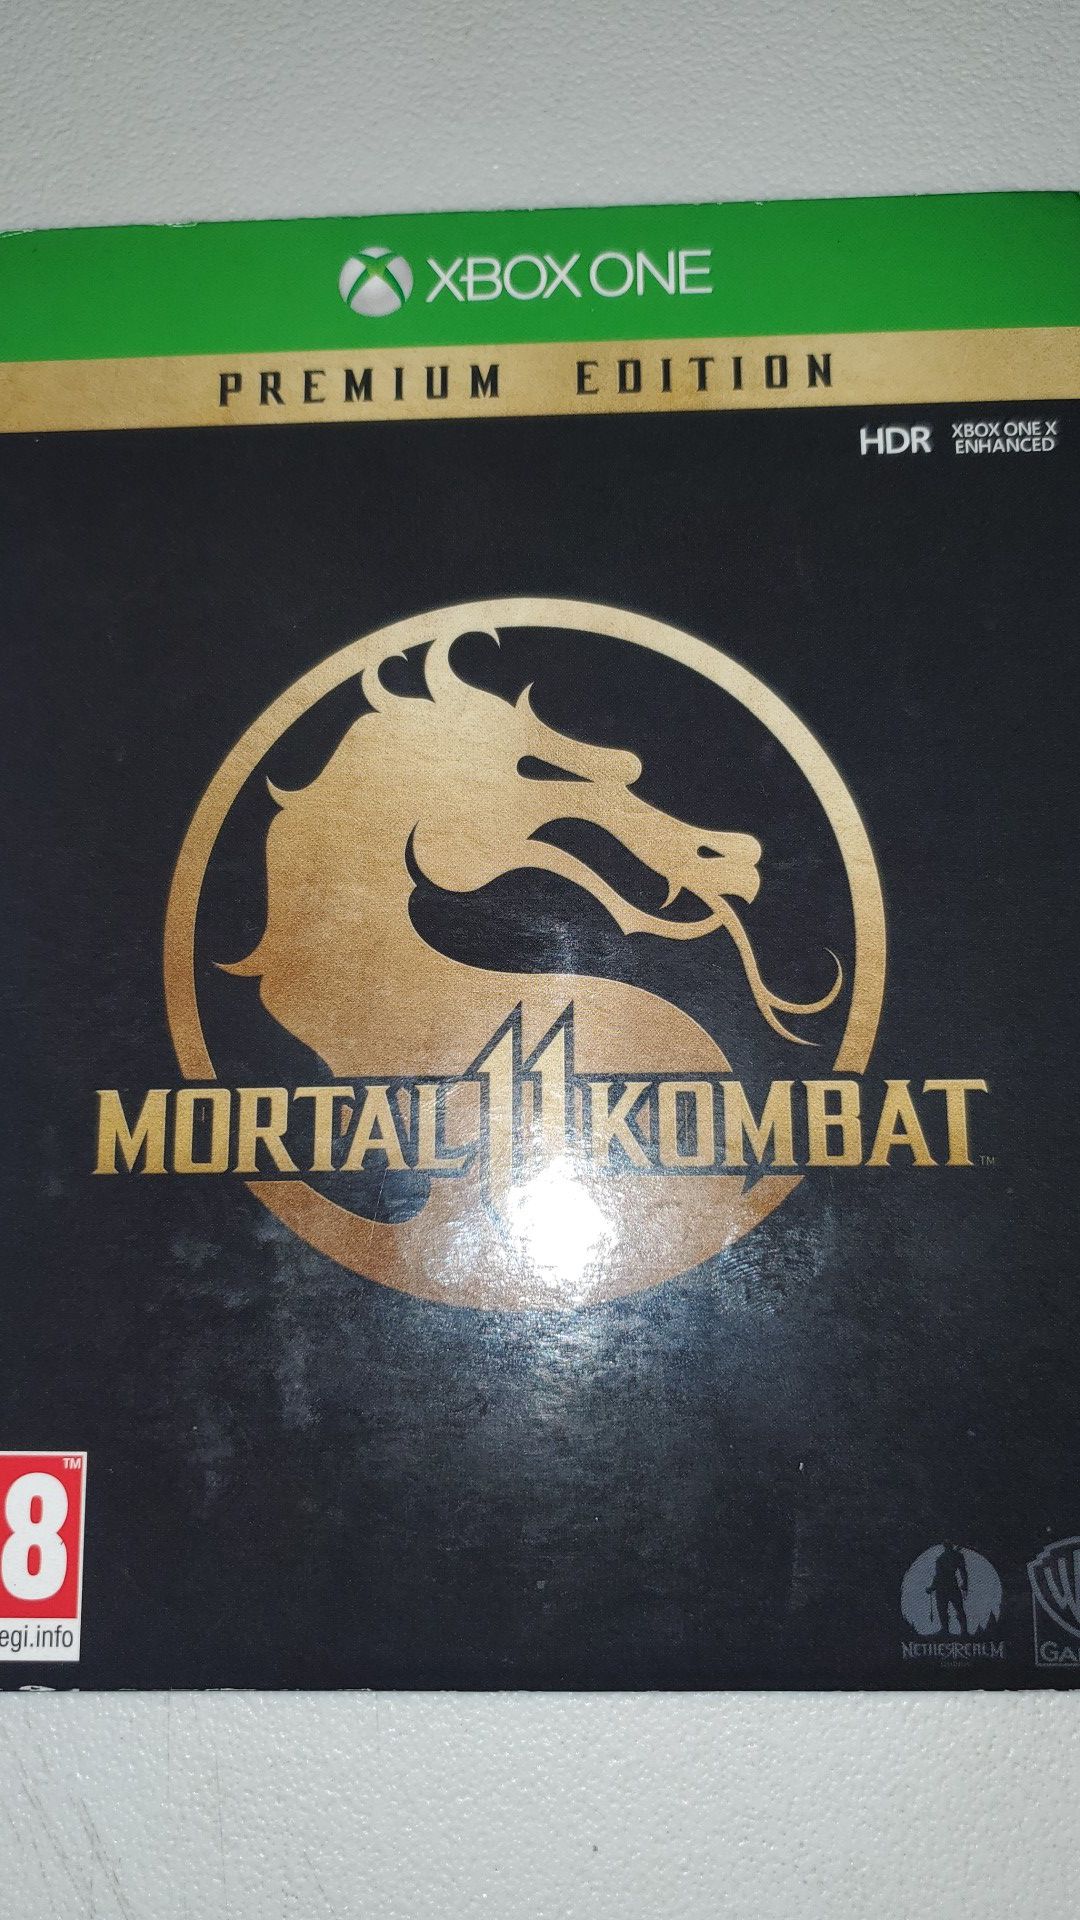 MK11 trade for Ps4 version.